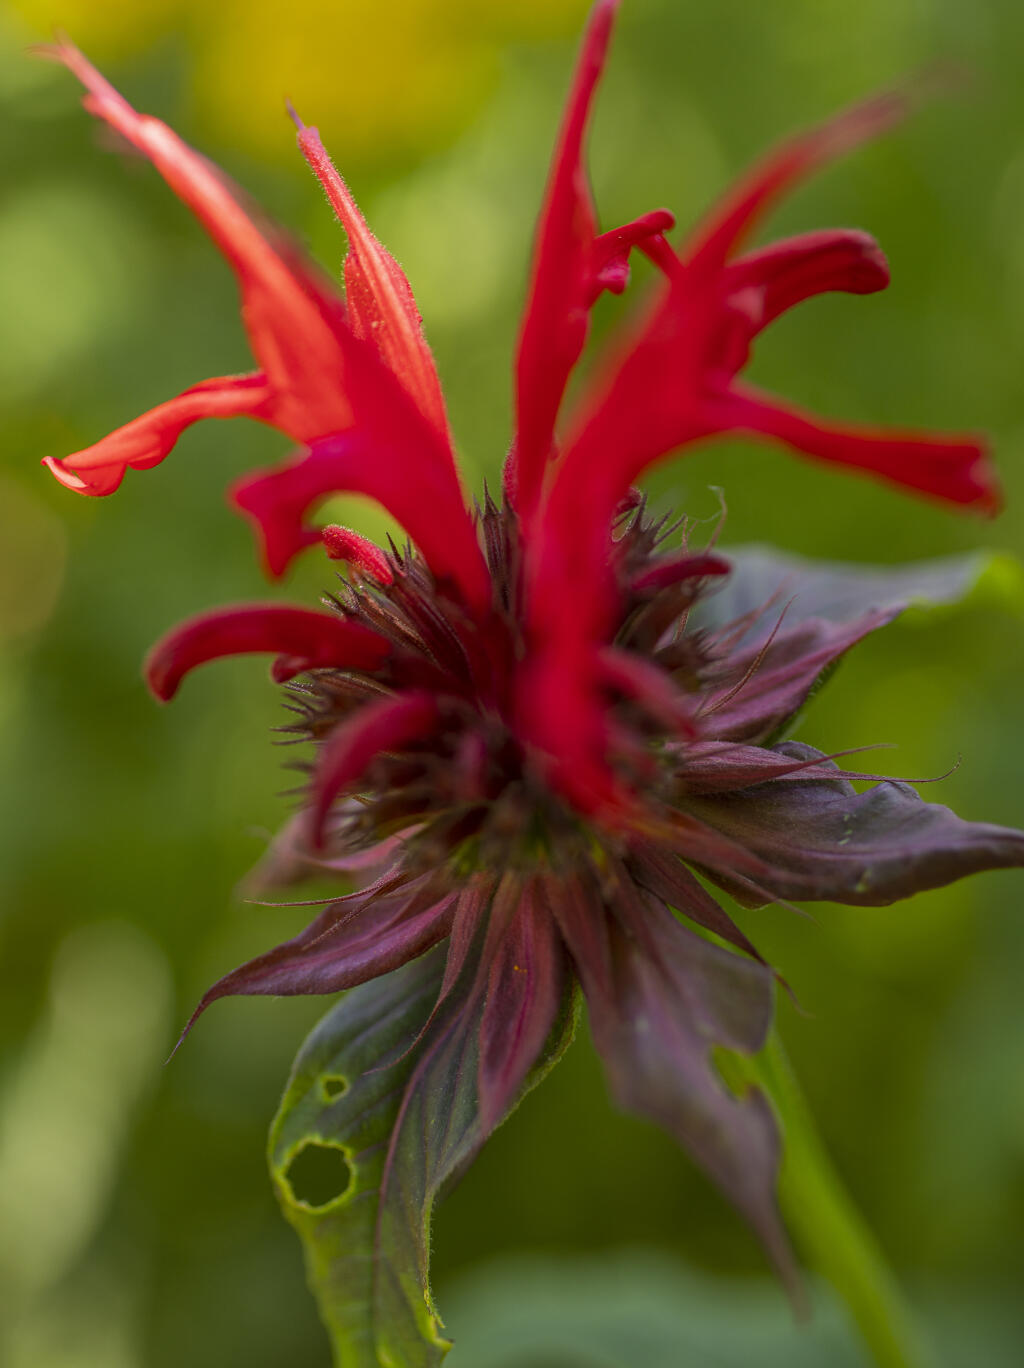 Monarda also known as bee balm, like this one growing at Kendall-Jackson Estate Gardens, can be grown in containers to make your own tea. (Chad Surmick / The Press Democrat)